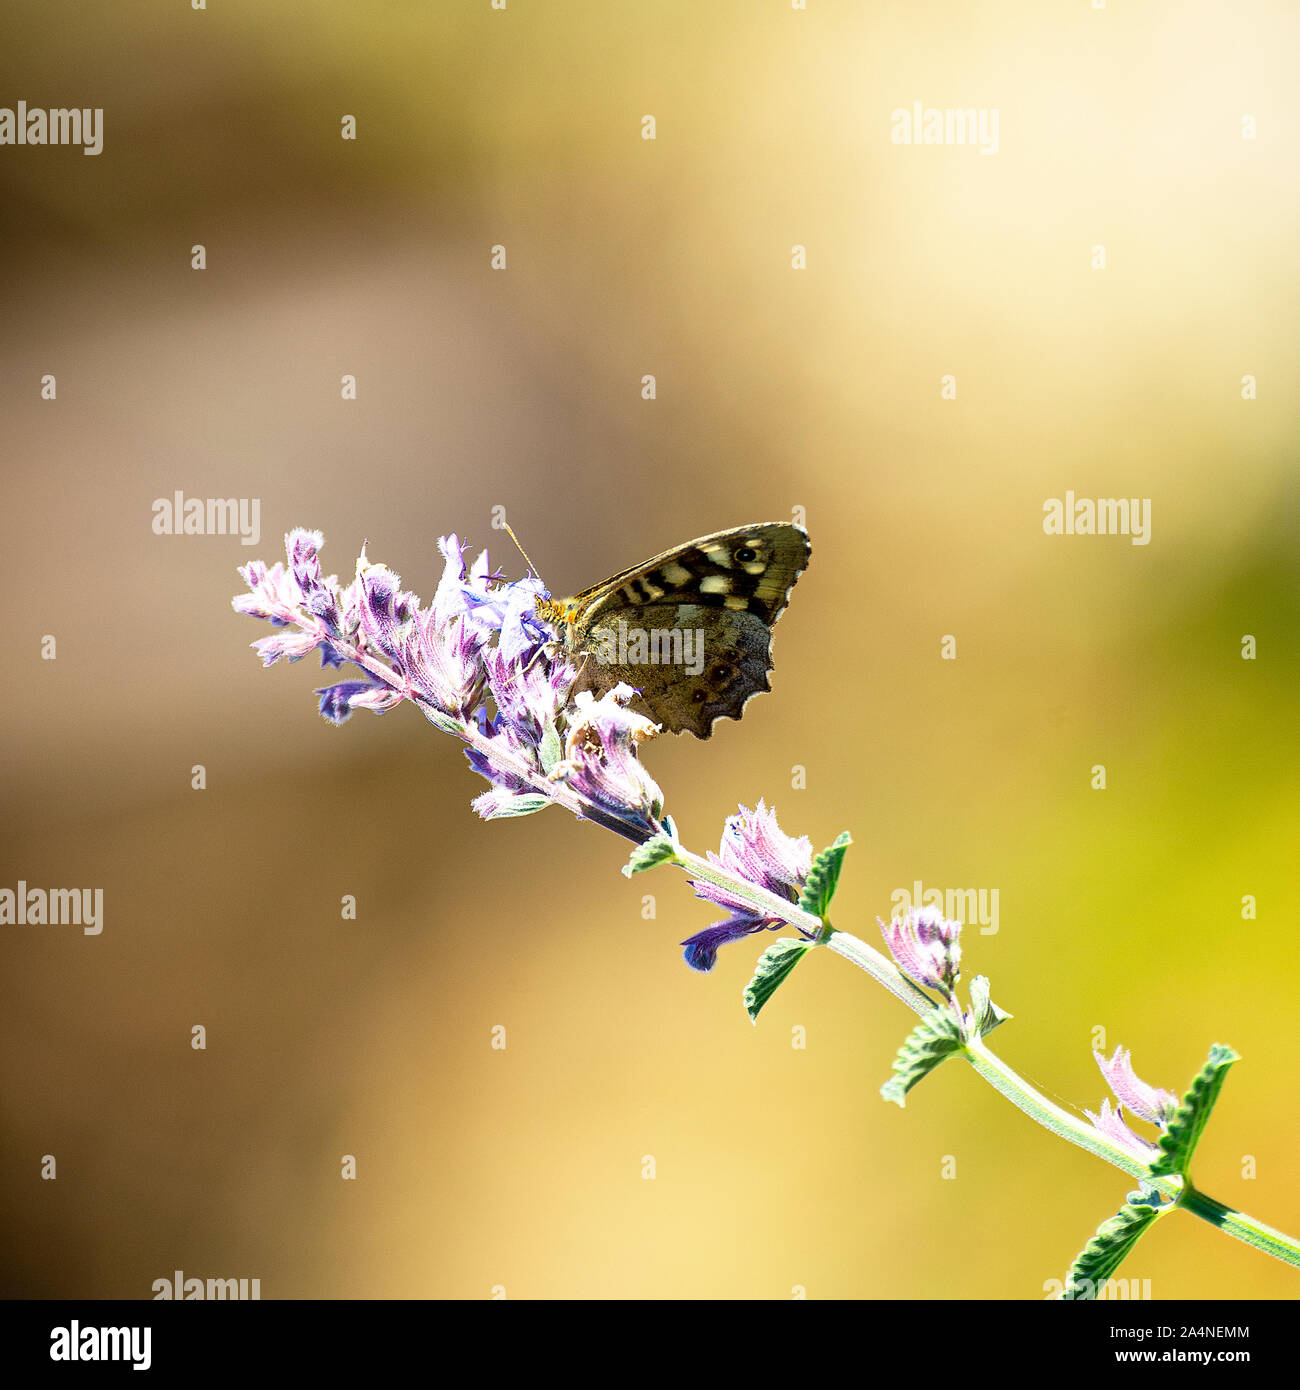 A Beautiful Speckled Wood Butterfly Feeding on a Blue Catmint Flower in a Garden near Sawdon North Yorkshire England United Kingdom UK Stock Photo